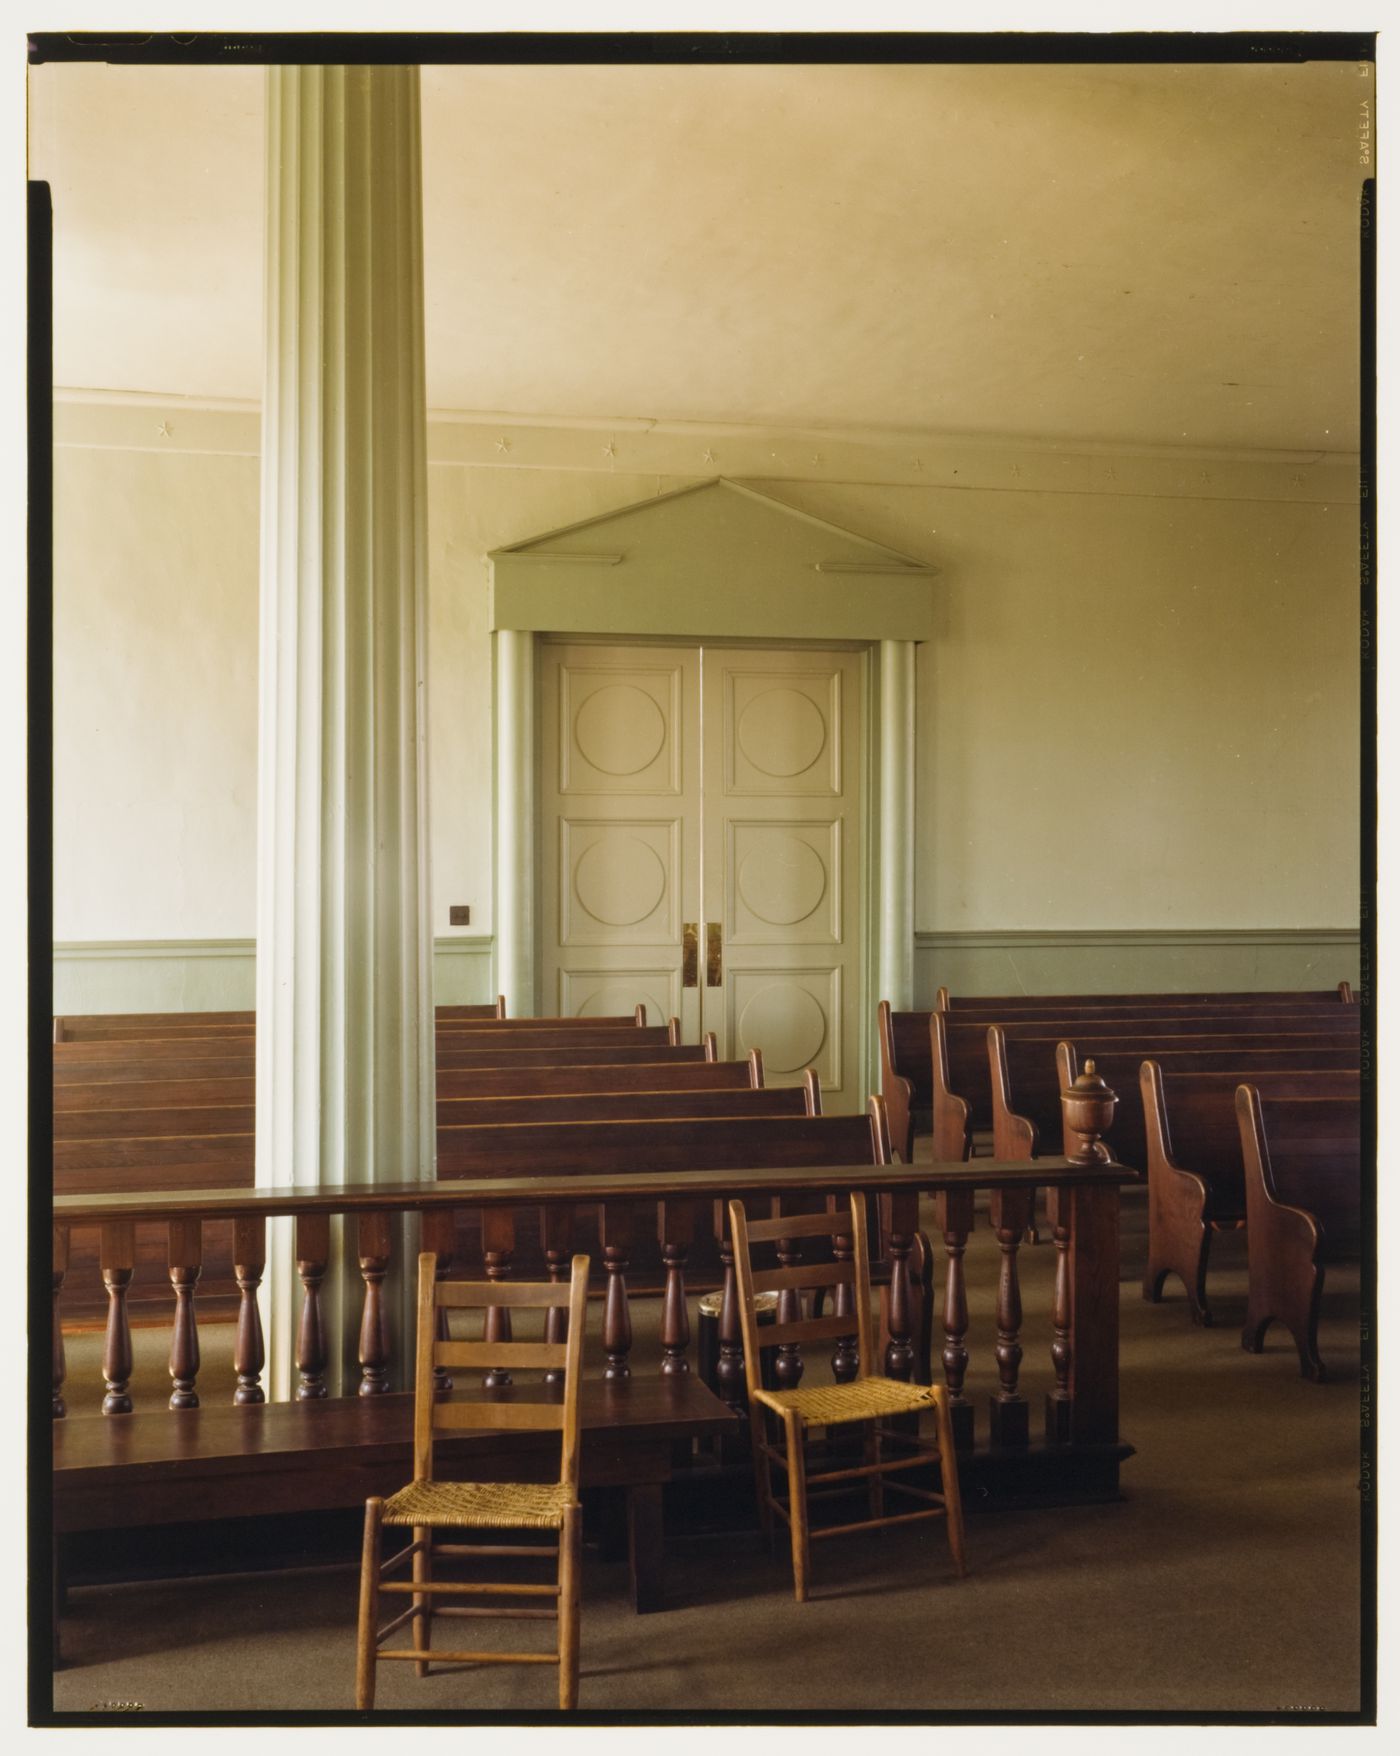 Interior view of the courtroom showing the audience seating, Greene County Courthouse, Greensboro, Georgia, United States